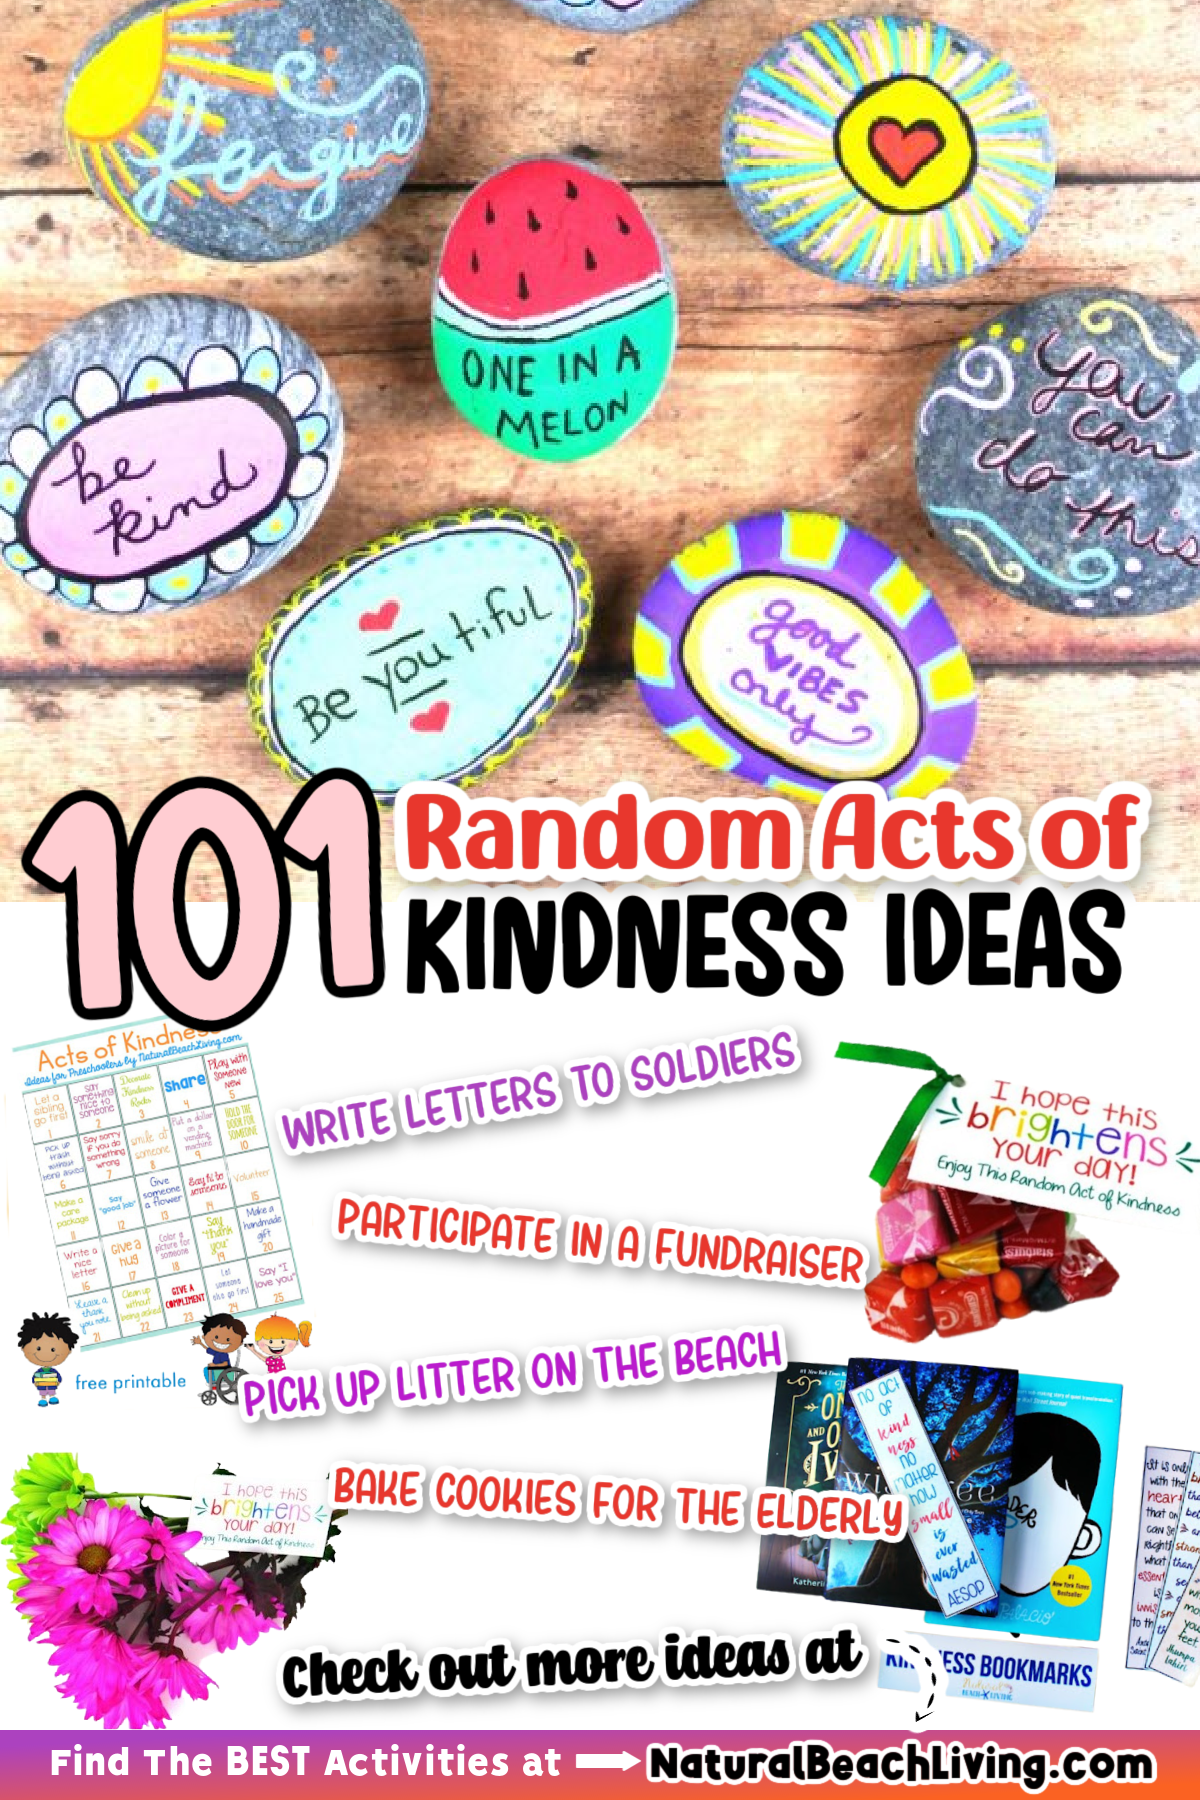 101 Random Acts of Kindness Ideas, All The Best Acts of kindness and Random Acts of Kindness Examples for Everyone, Acts of Kindness for Kids, You'll find over 200 Easy Random Acts of Kindness and Small acts of kindness. Plus, Kindness Printables and Kindness Activities!